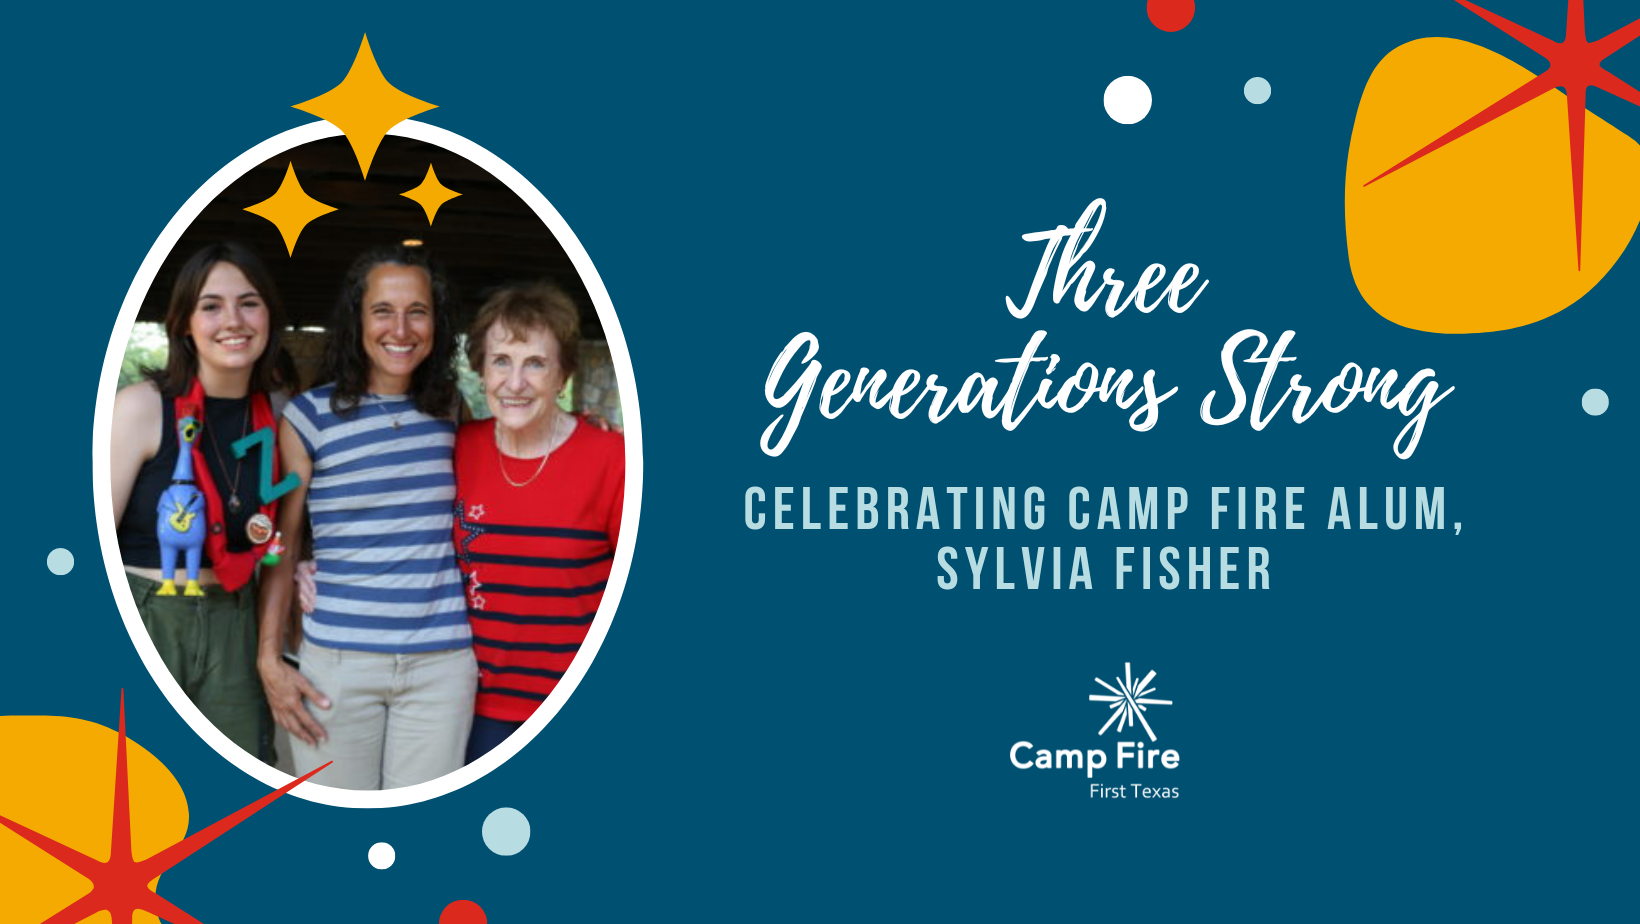 Three Generations Strong – Celebrating Camp Fire Alum, Sylvia Fisher, a Camp Fire First Texas blog